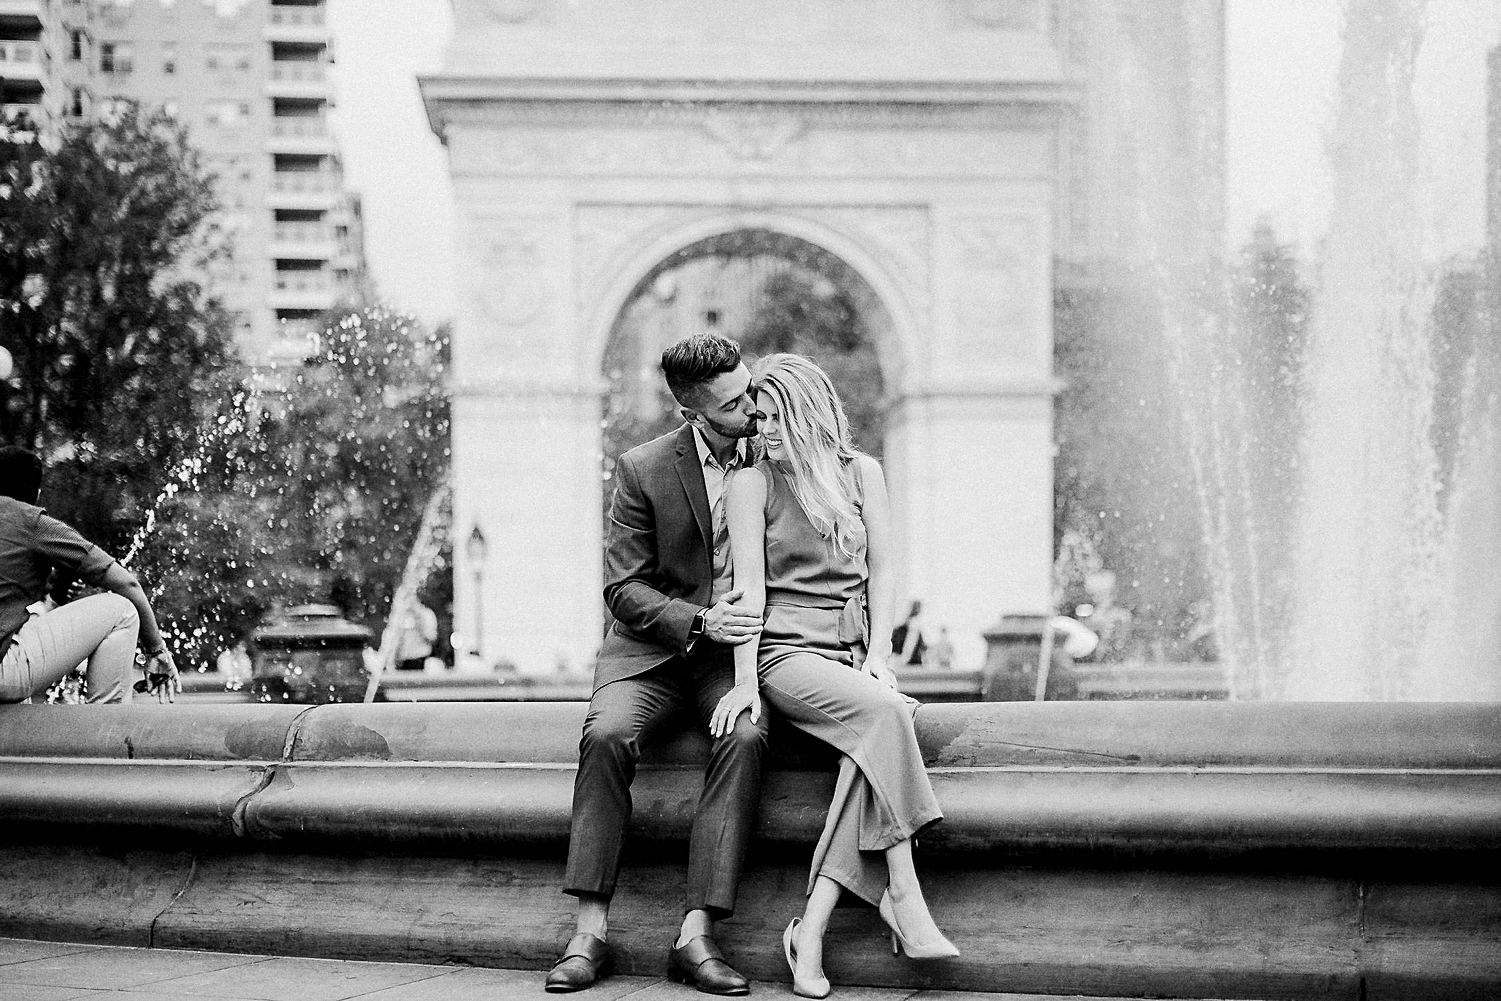 Man and woman sitting together on fountain Washington Square Park New York City